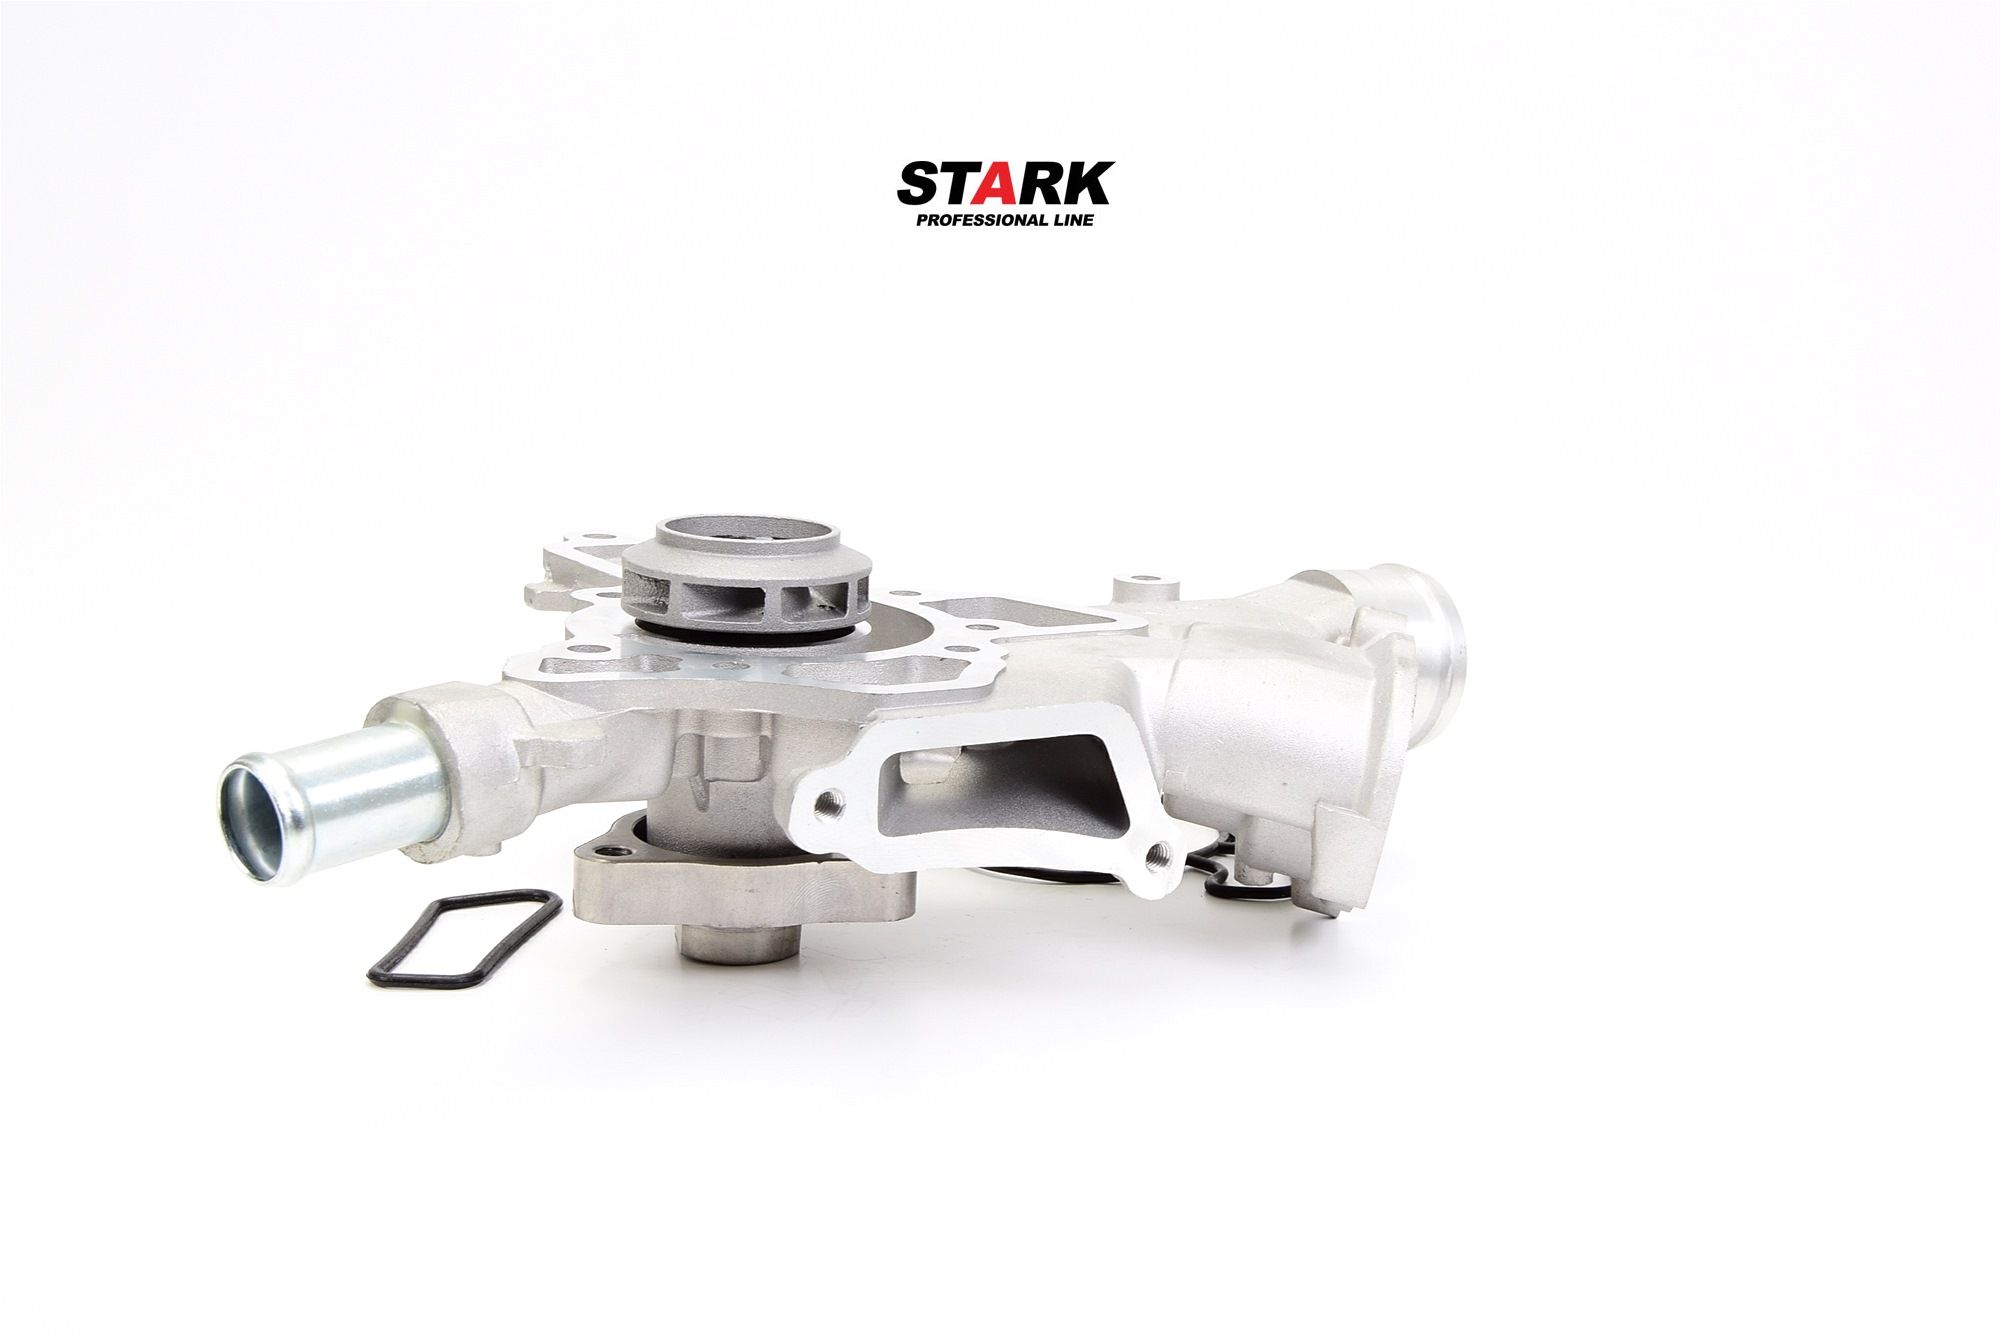 STARK SKWP-0520025 Water pump Cast Aluminium, without belt pulley, with gaskets/seals, Mechanical, Metal impeller, for v-ribbed belt use